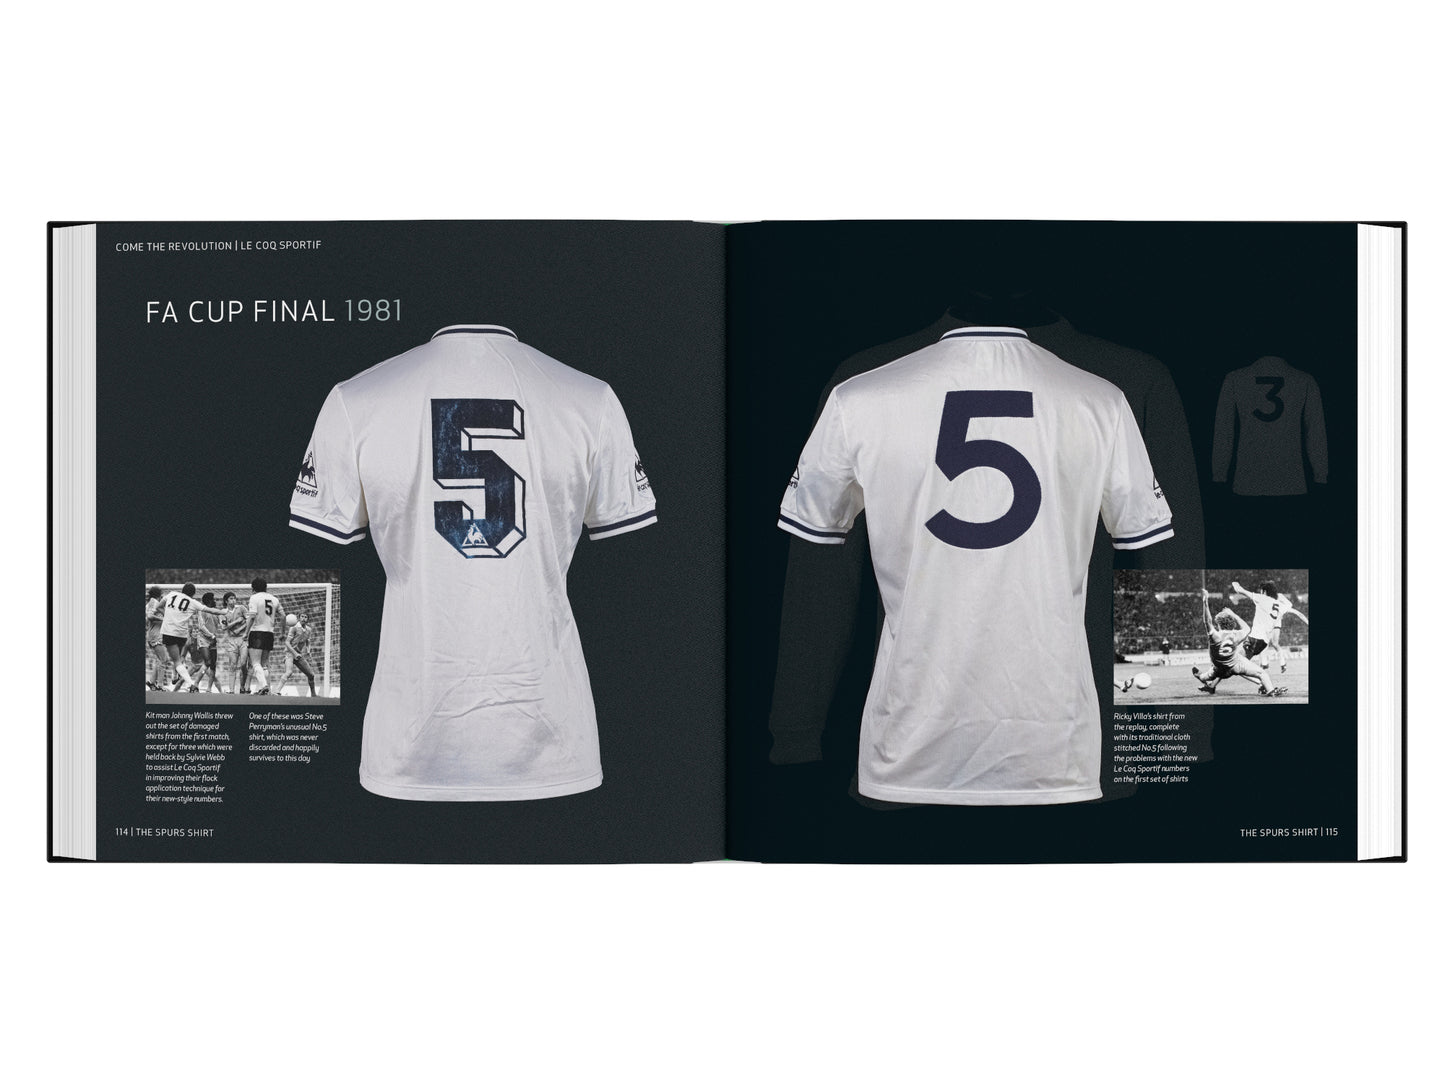 The Spurs Shirt - 2nd edition